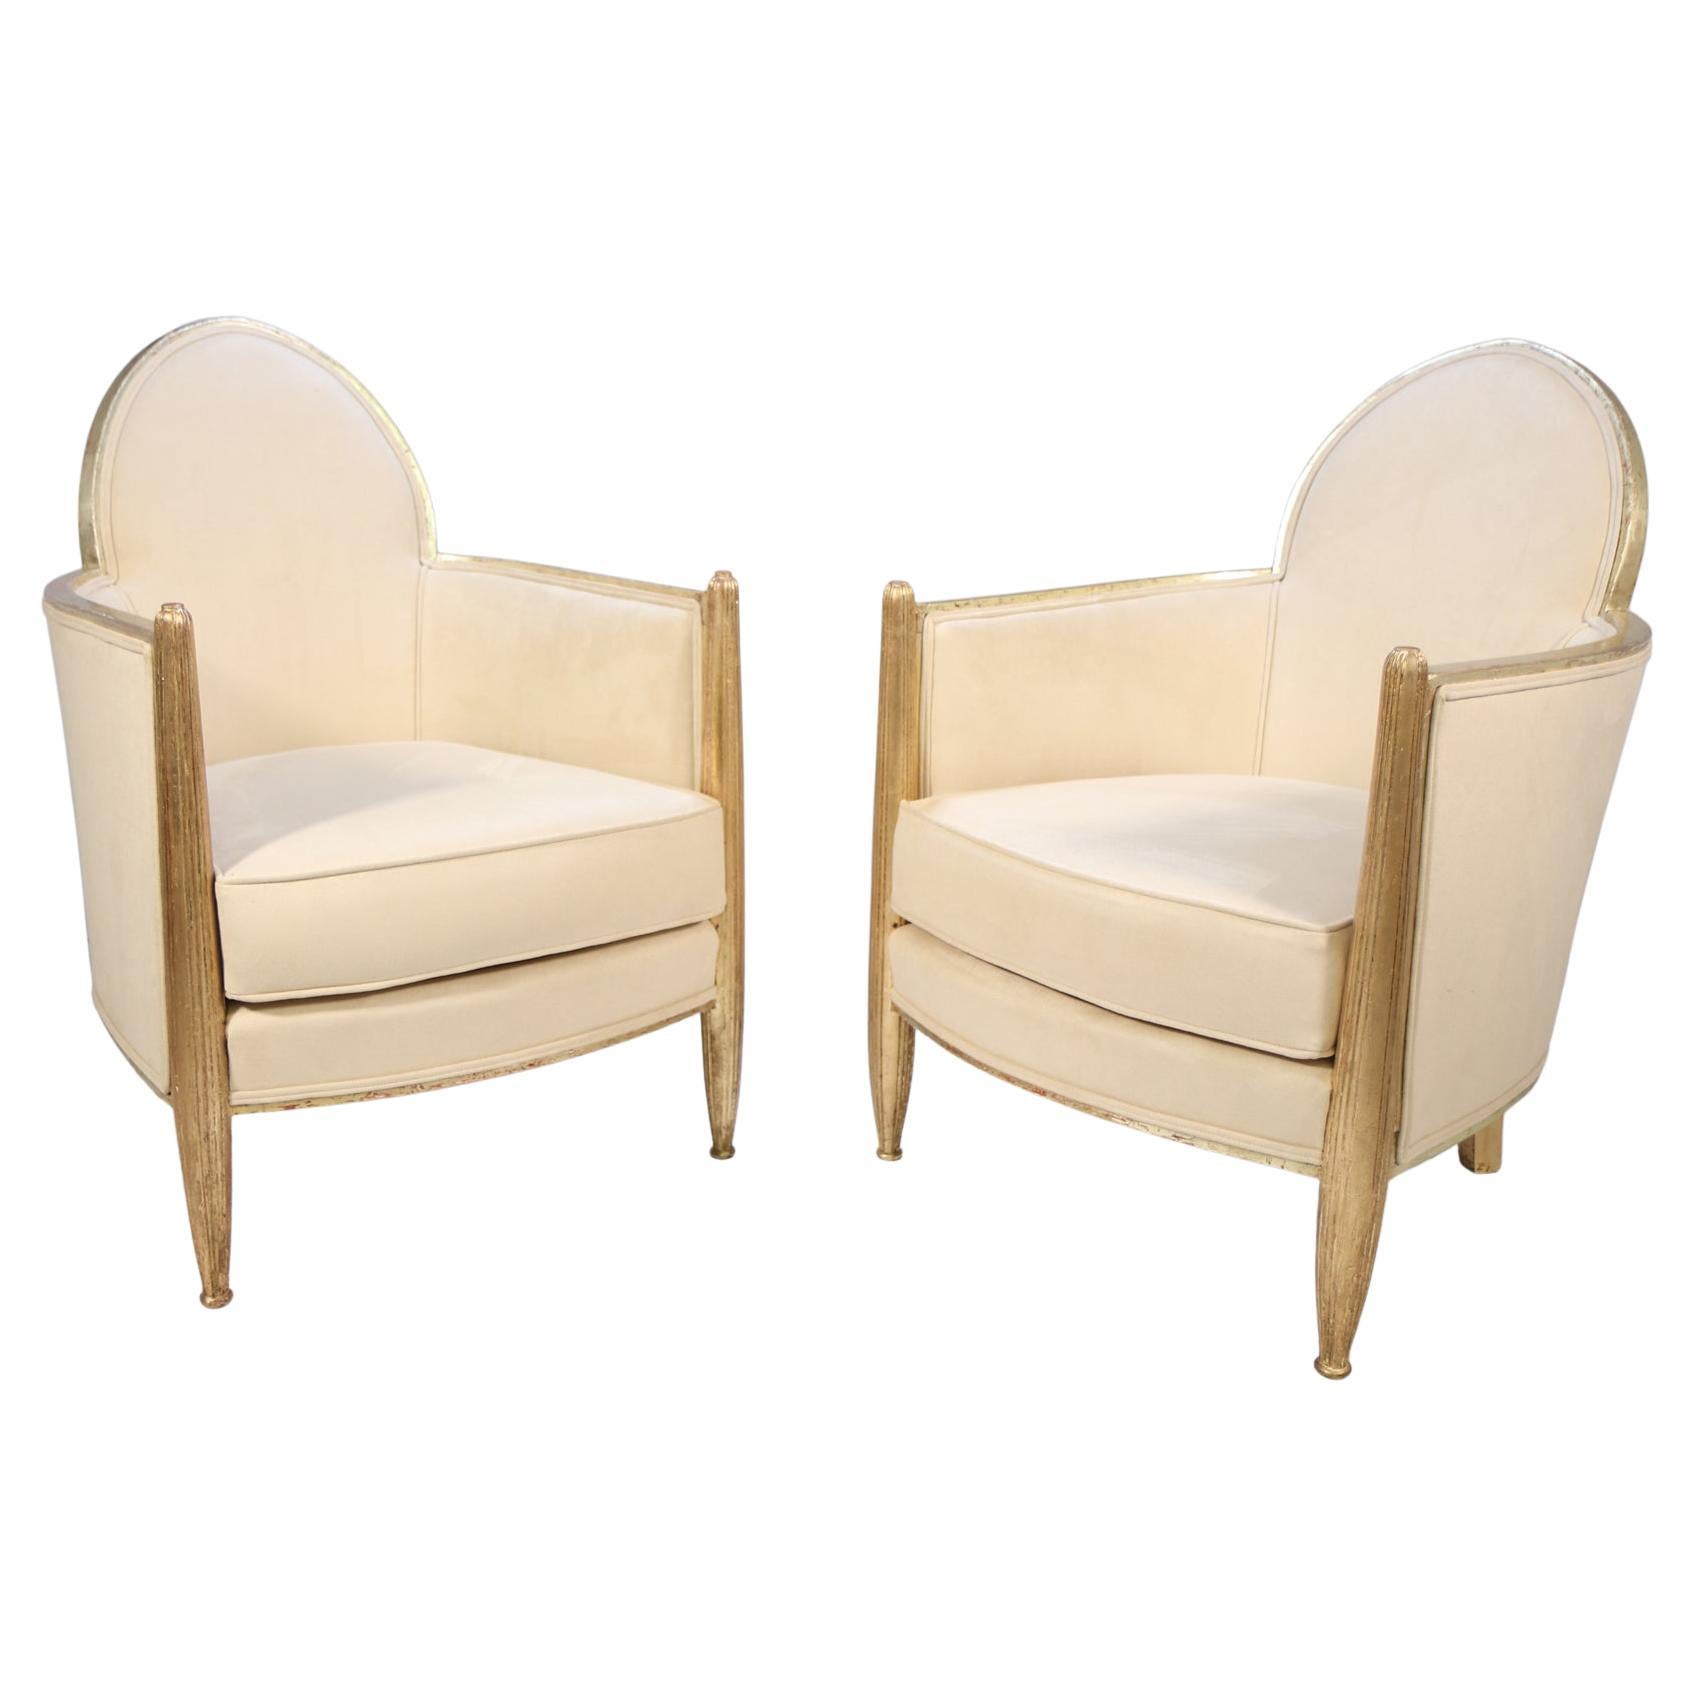 Pair of French Art Deco Armchairs in Parcel Gilt Wood